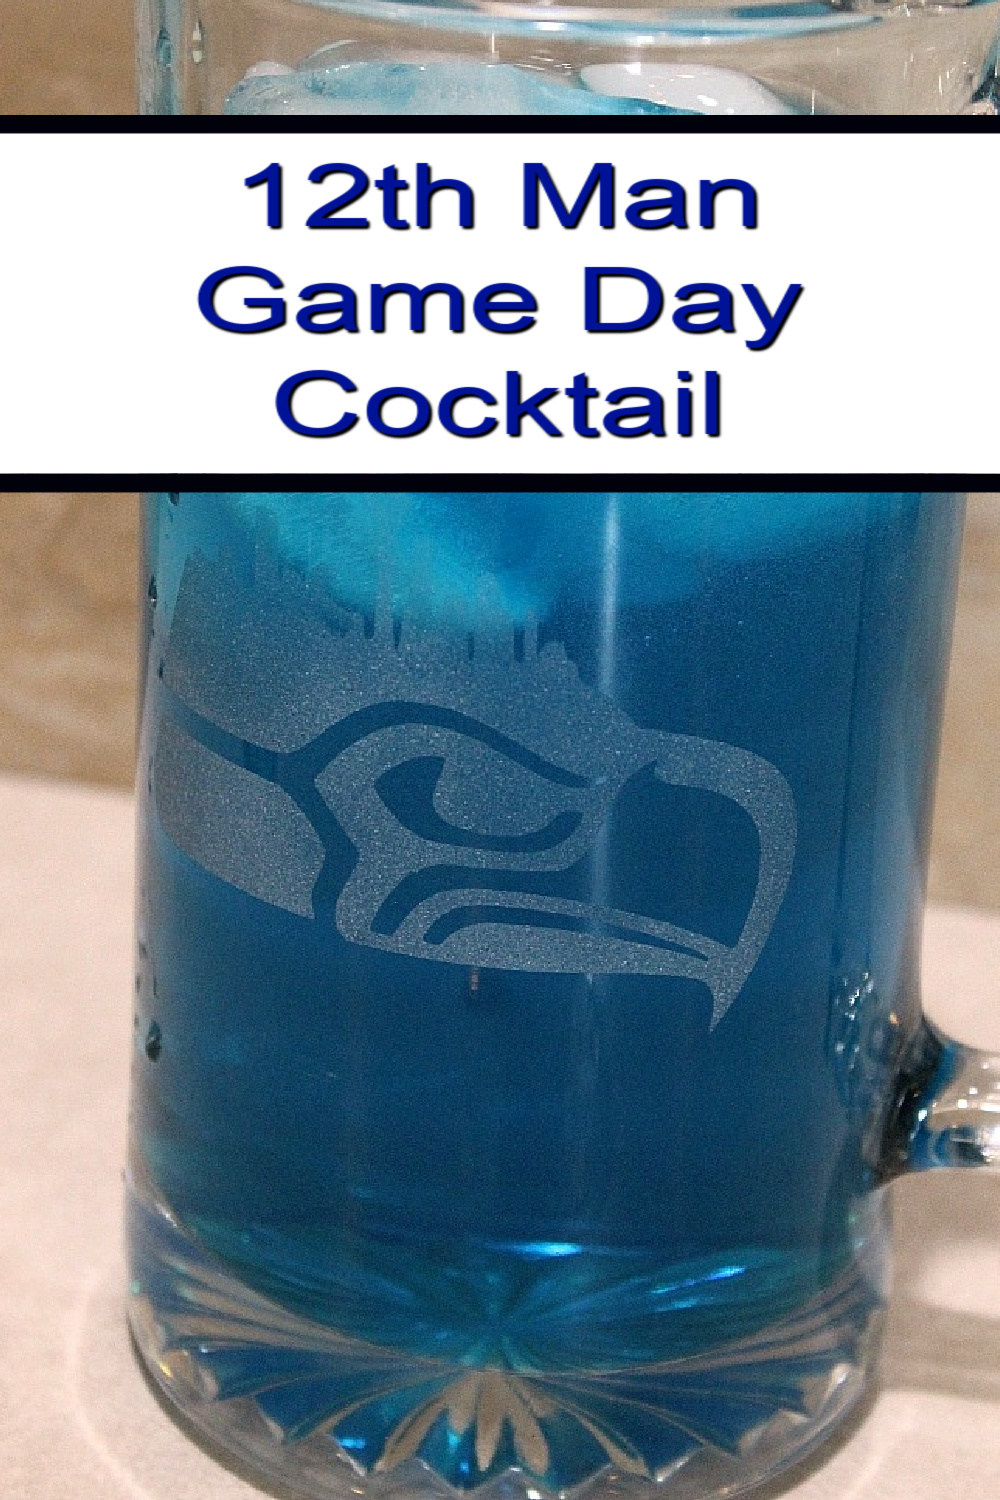 This 12th Man Game Day Cocktail Recipe is perfect to whip up at home any time or when tailgating! The taste is light and refreshing for cheering them on!  